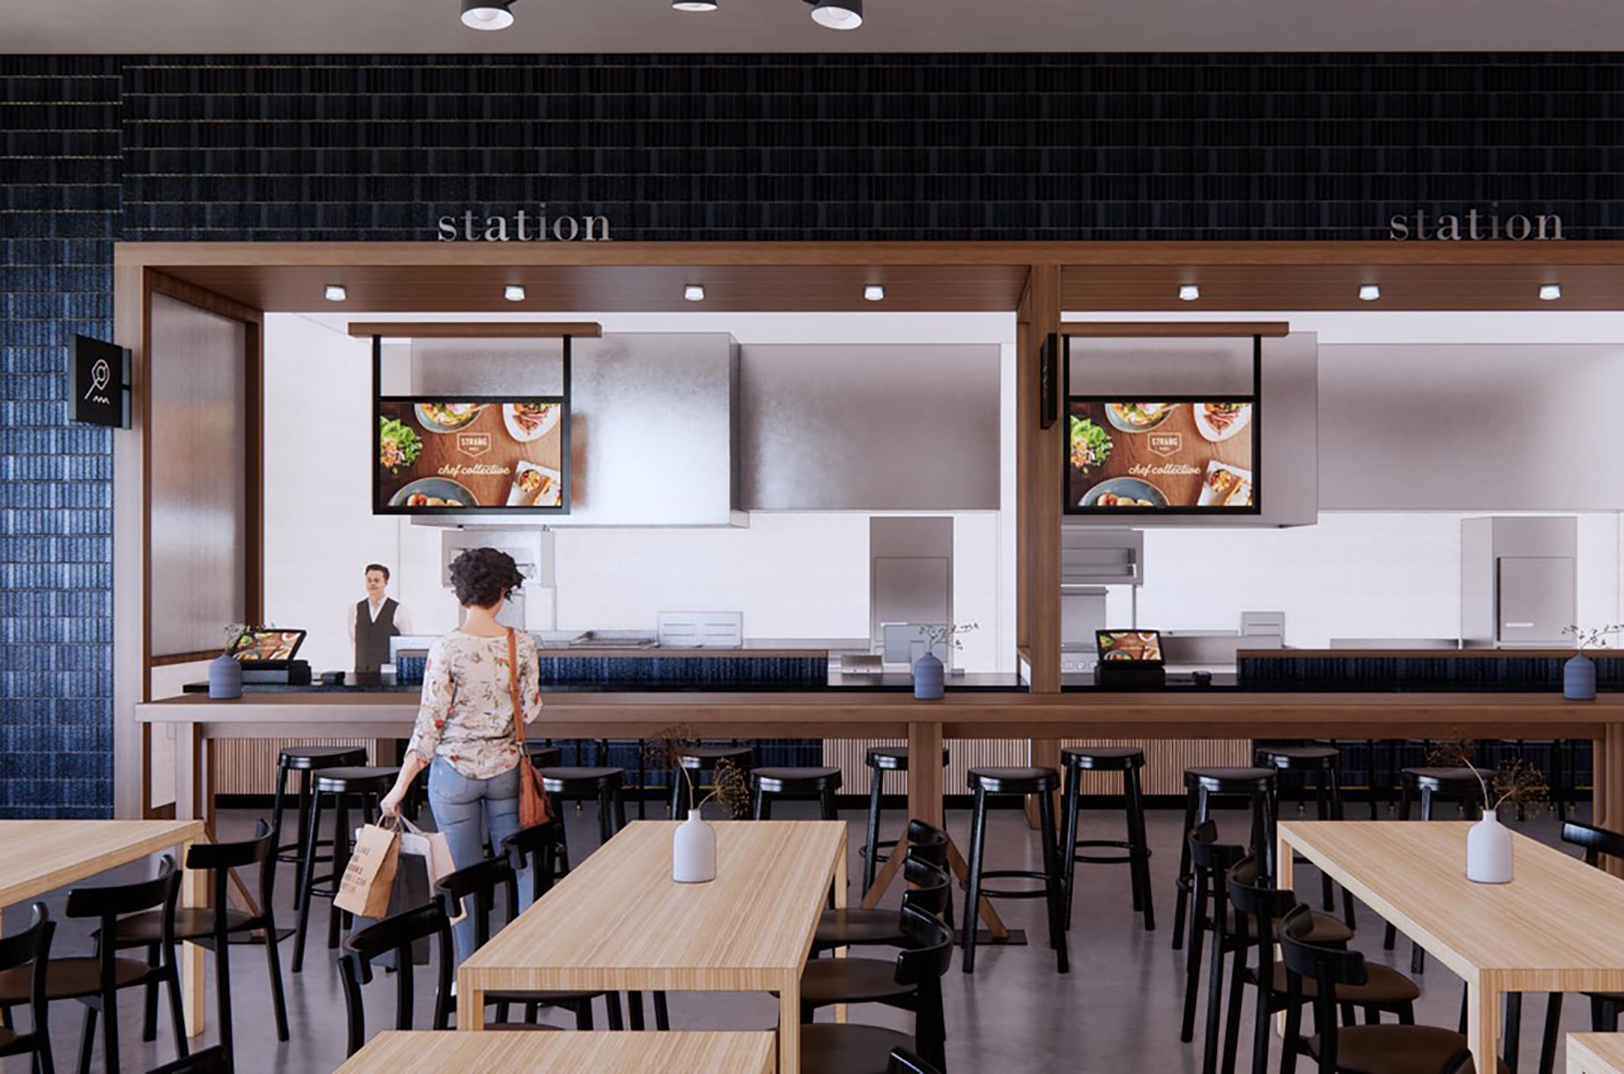 Coming to the Plaza: Food hall to put ‘chefs out front’ from breakfast to late-night crowd